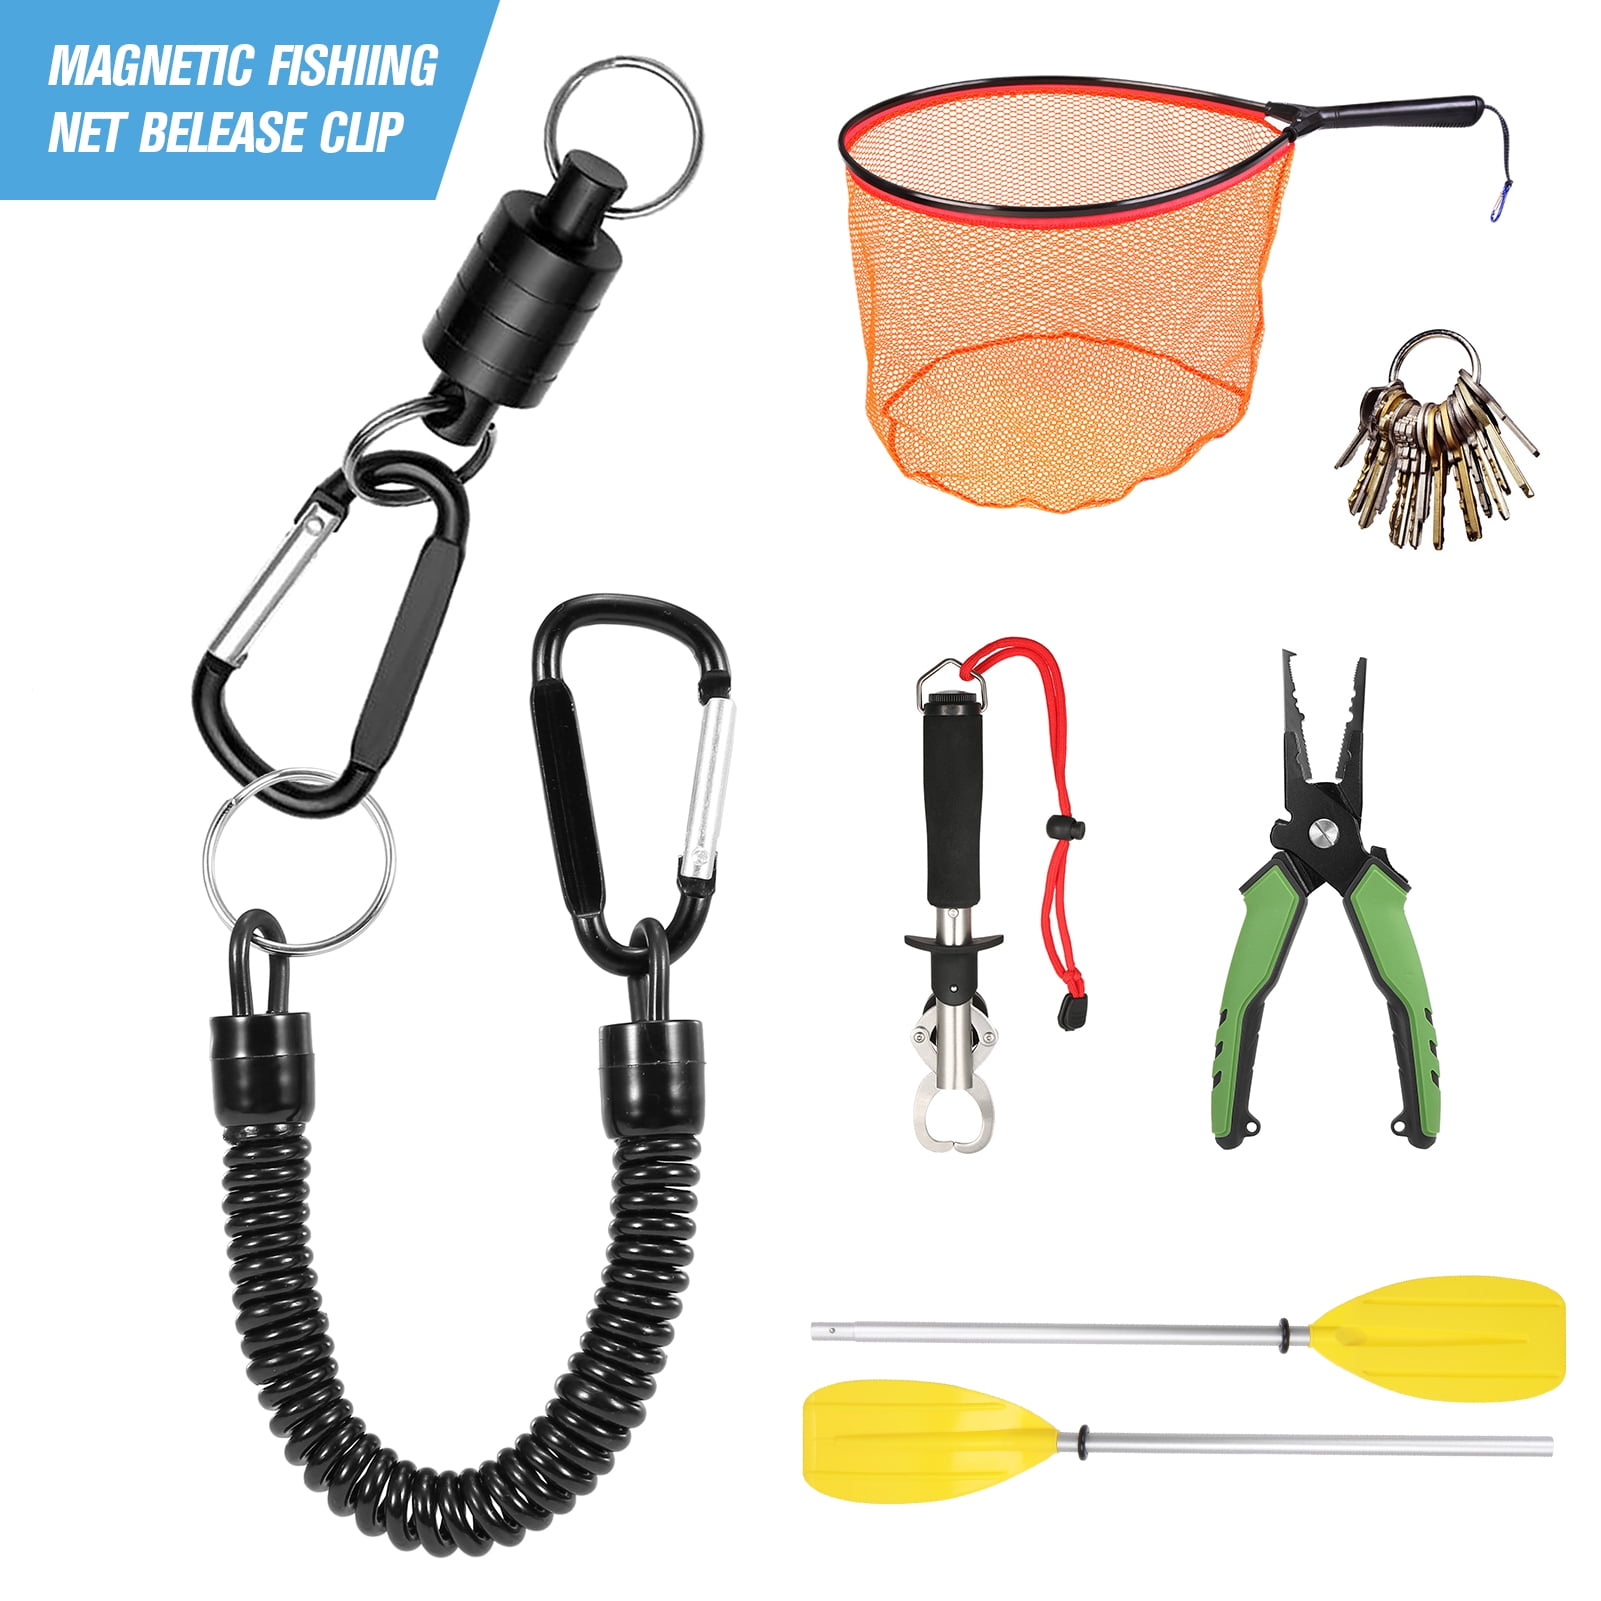 Magnetic Net Release Holder Keep Your Landing Net Secure with this  Convenient Magnet Clip Perfect for Fly Fishing Adventures 